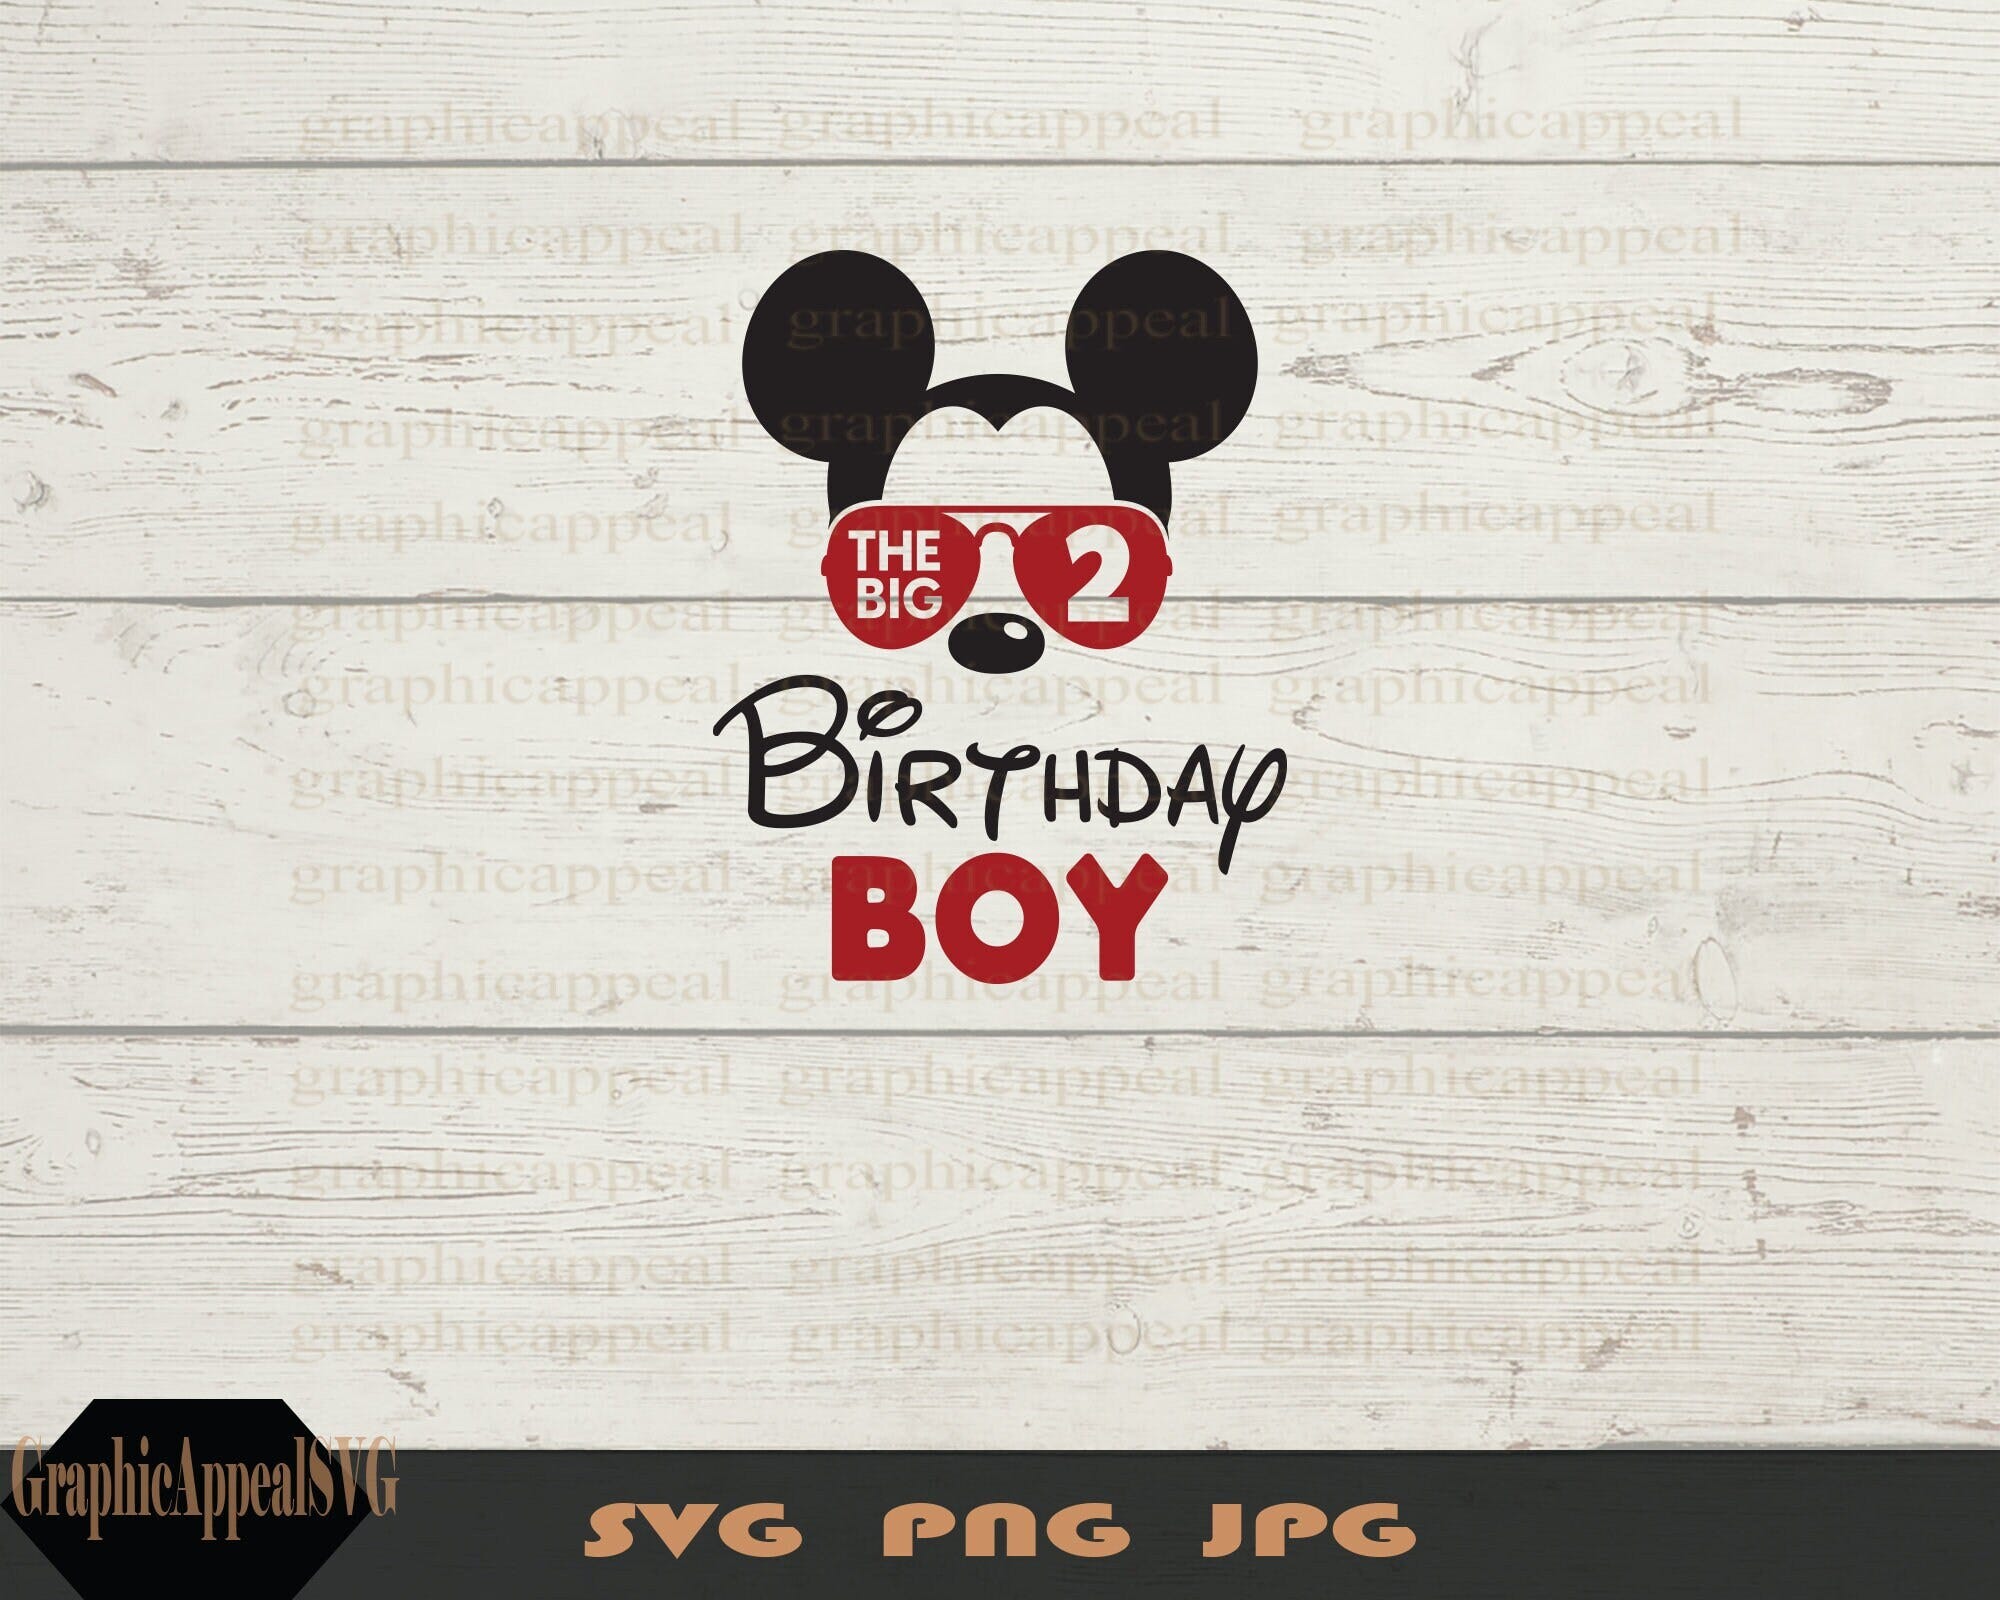 2nd Birthday, Svg, Birthday Boy, Birthday Mouse, png, jpg, mouse head, sunglasses, digital download, cut file, clip art, sublimation, file